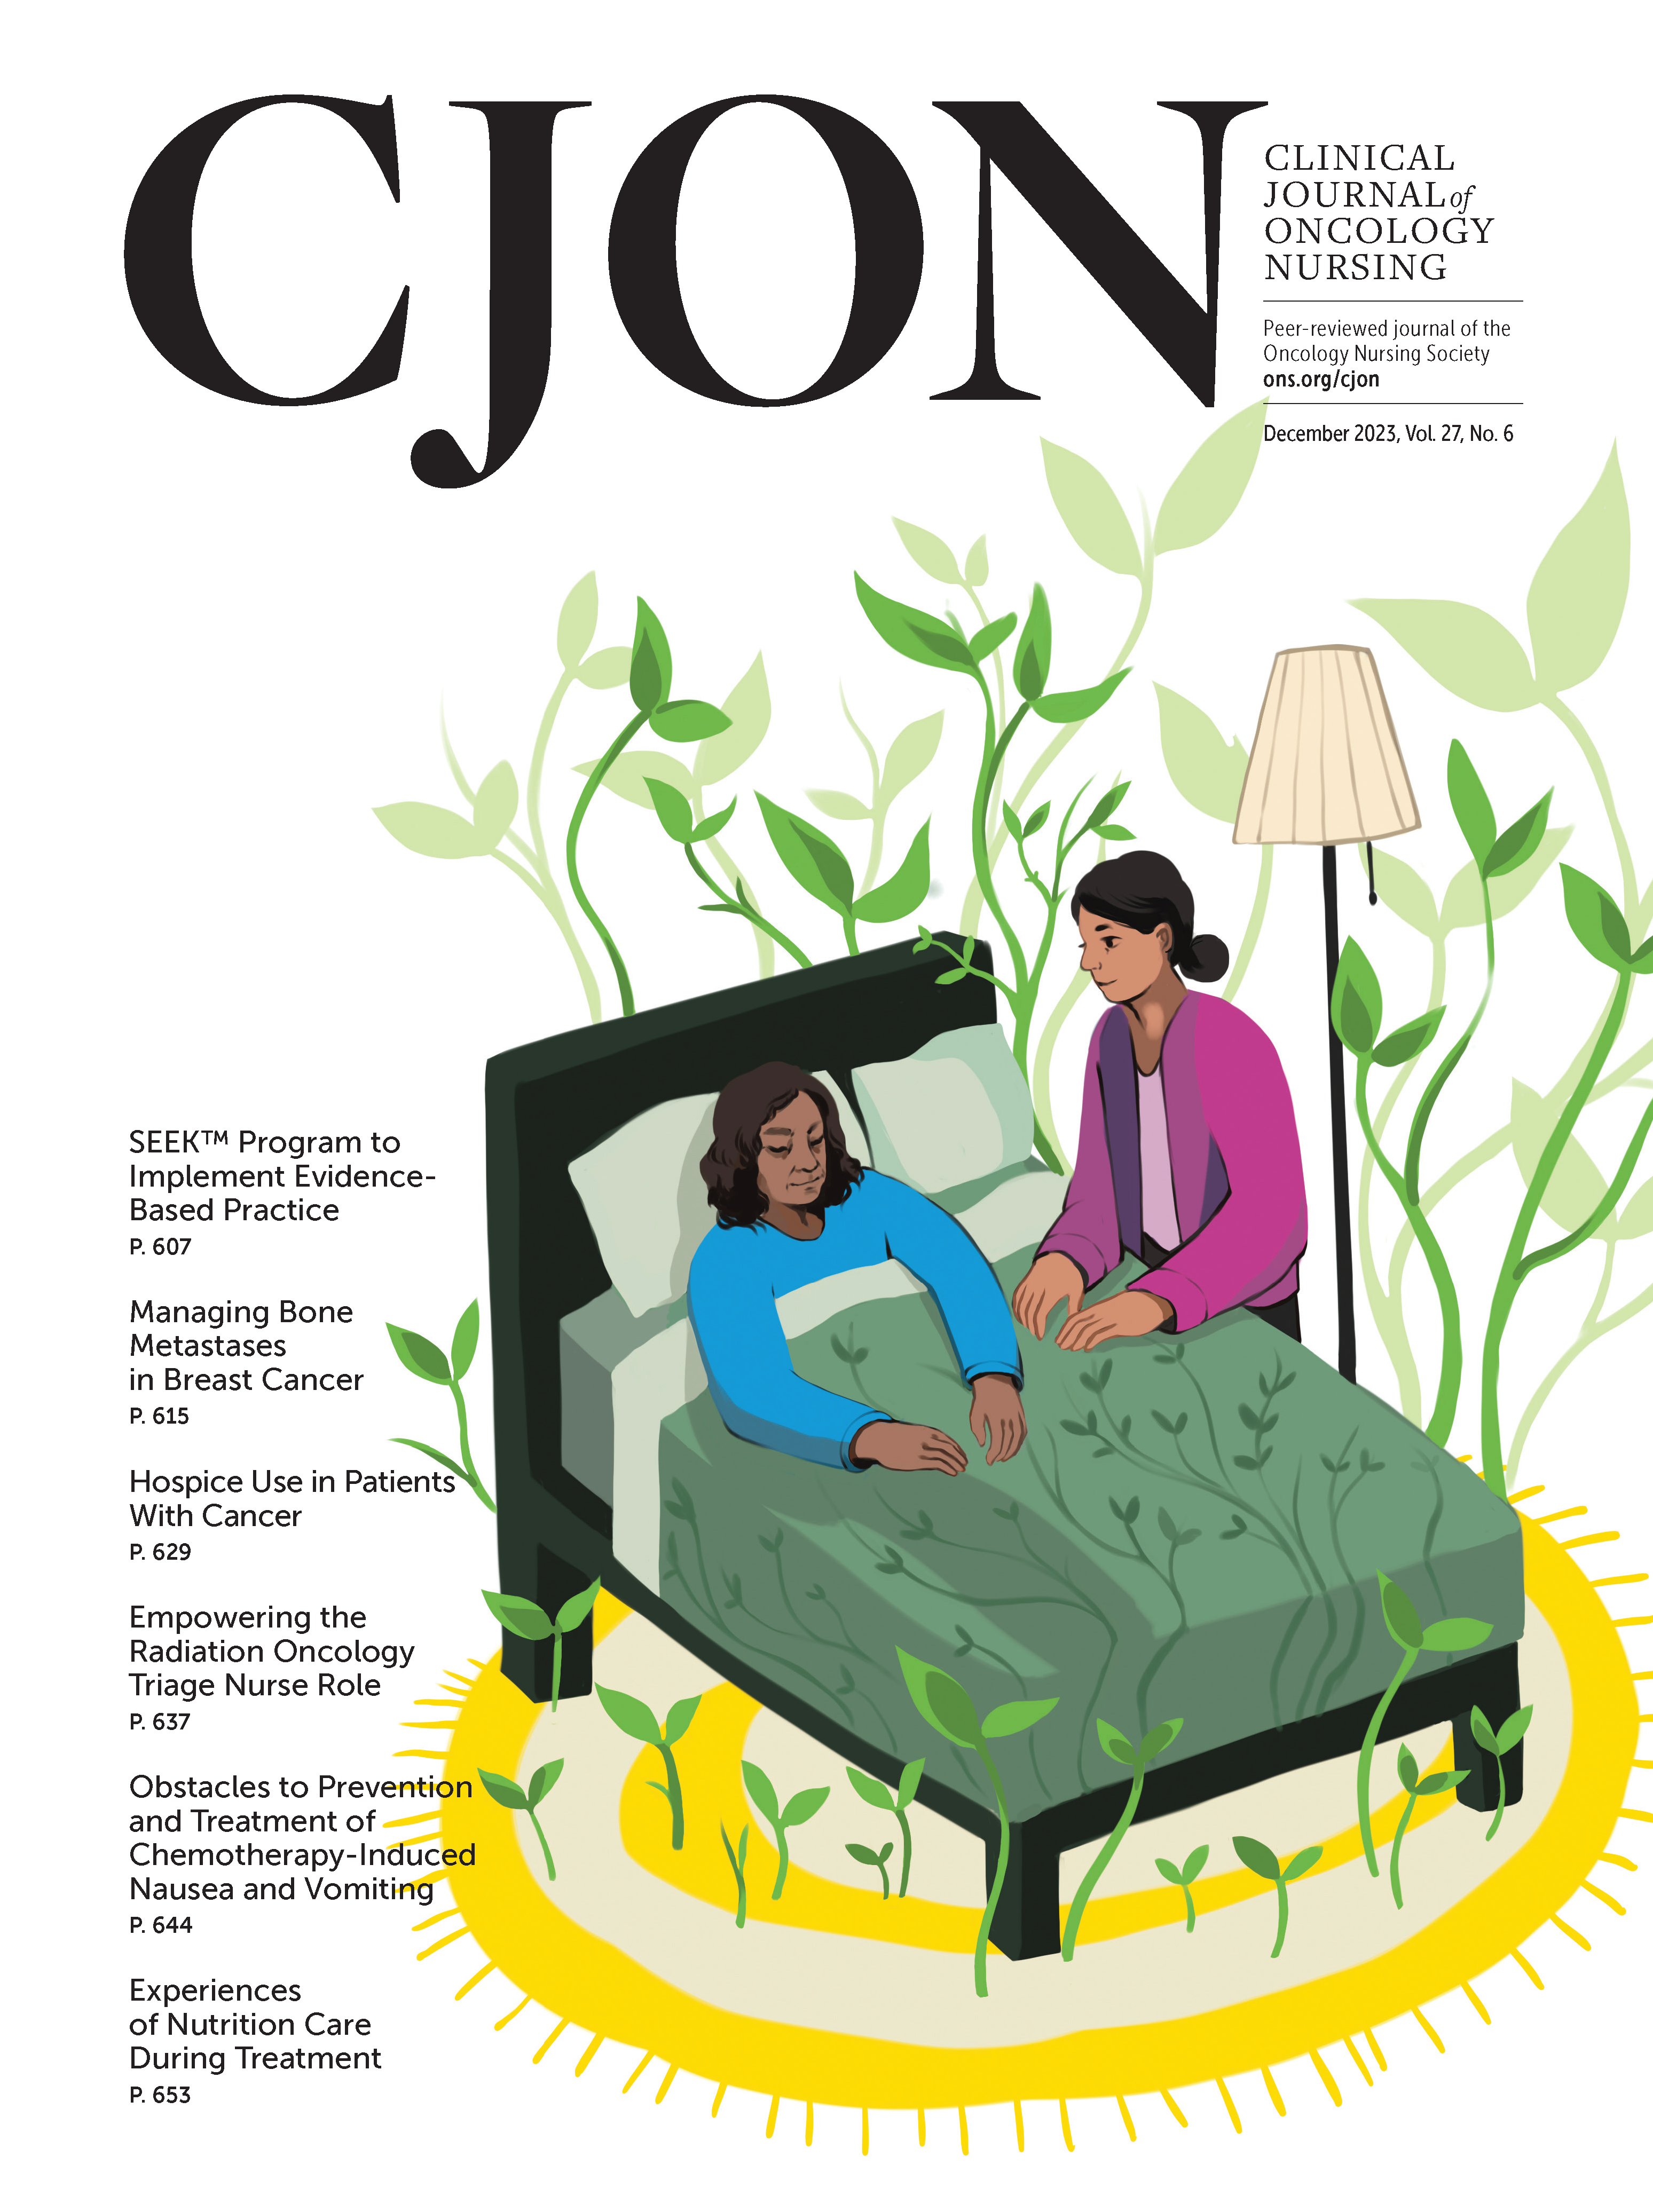 Read Current Issue of CJON